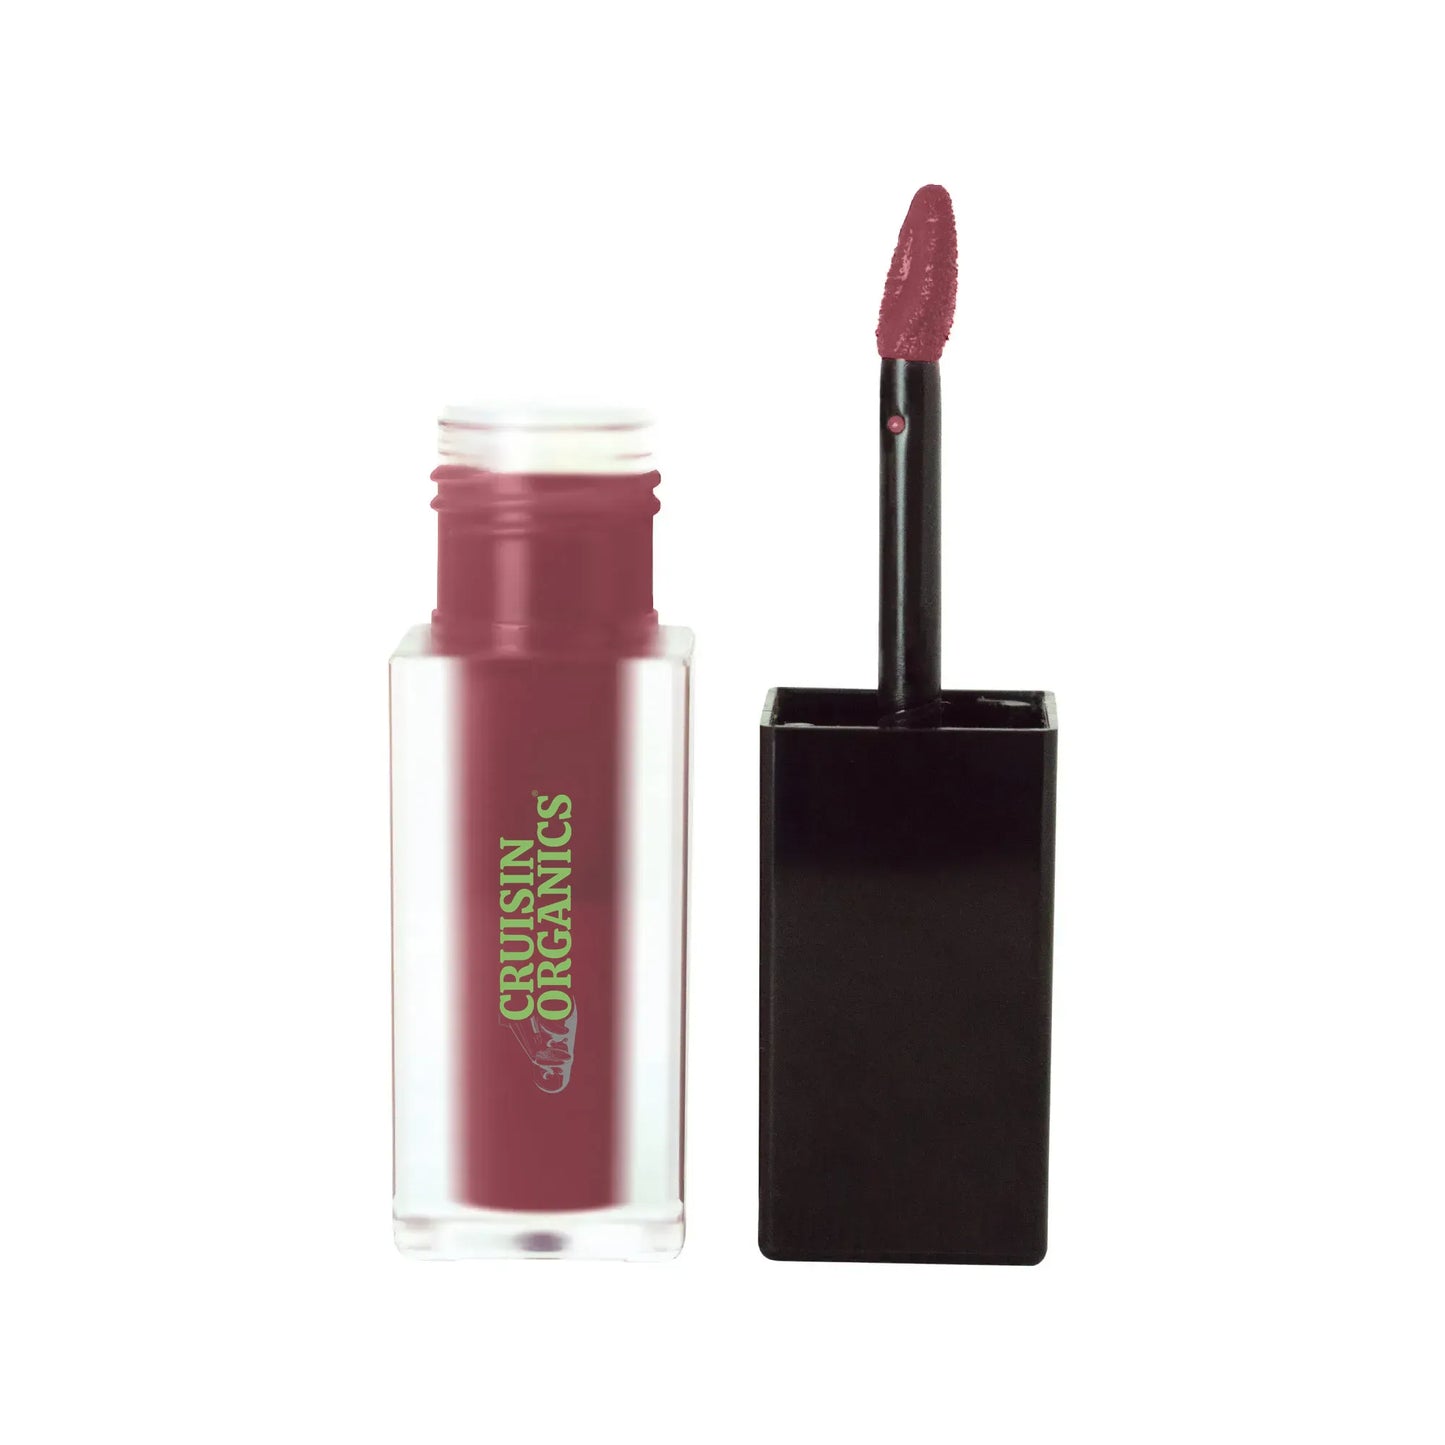 Experience the captivating colors of our Cruisin Organics Twilight Matte Lip Stain, designed to transport you to the perfect zone. With an unparalleled blend of vitamin E, this timeless creation uses a matte finish to achieve a dimension of stunning light and shadow. Enjoy the benefits of this sophisticated product.